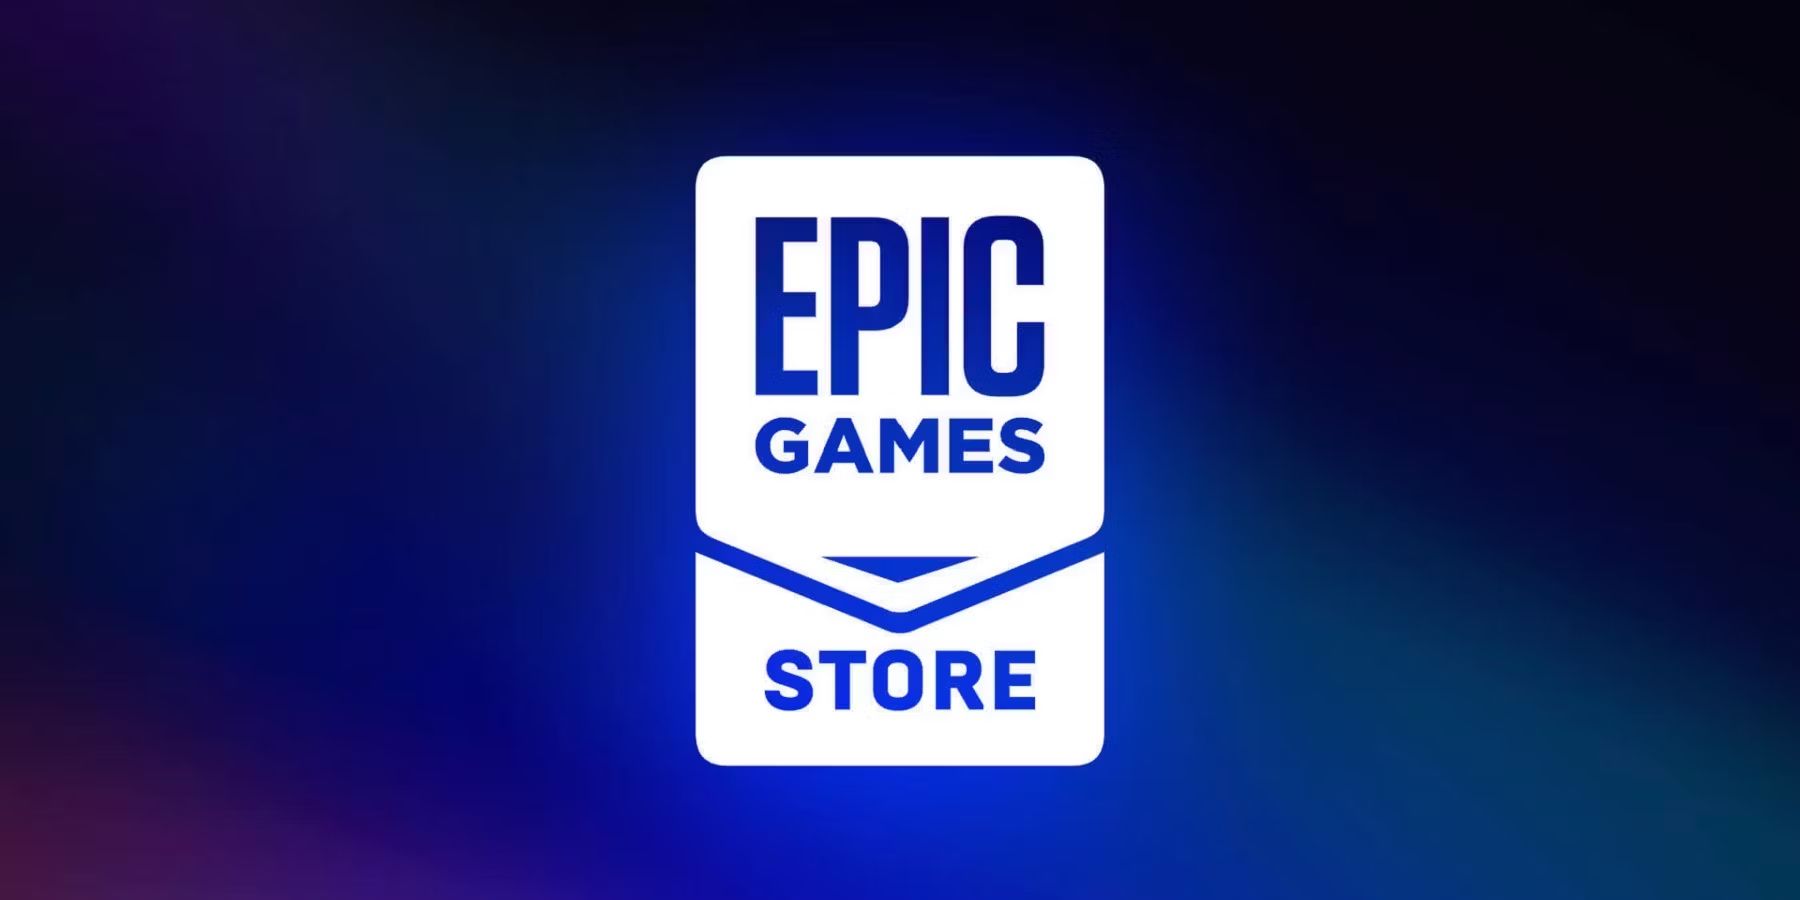 epic-games-store-glowing-blue